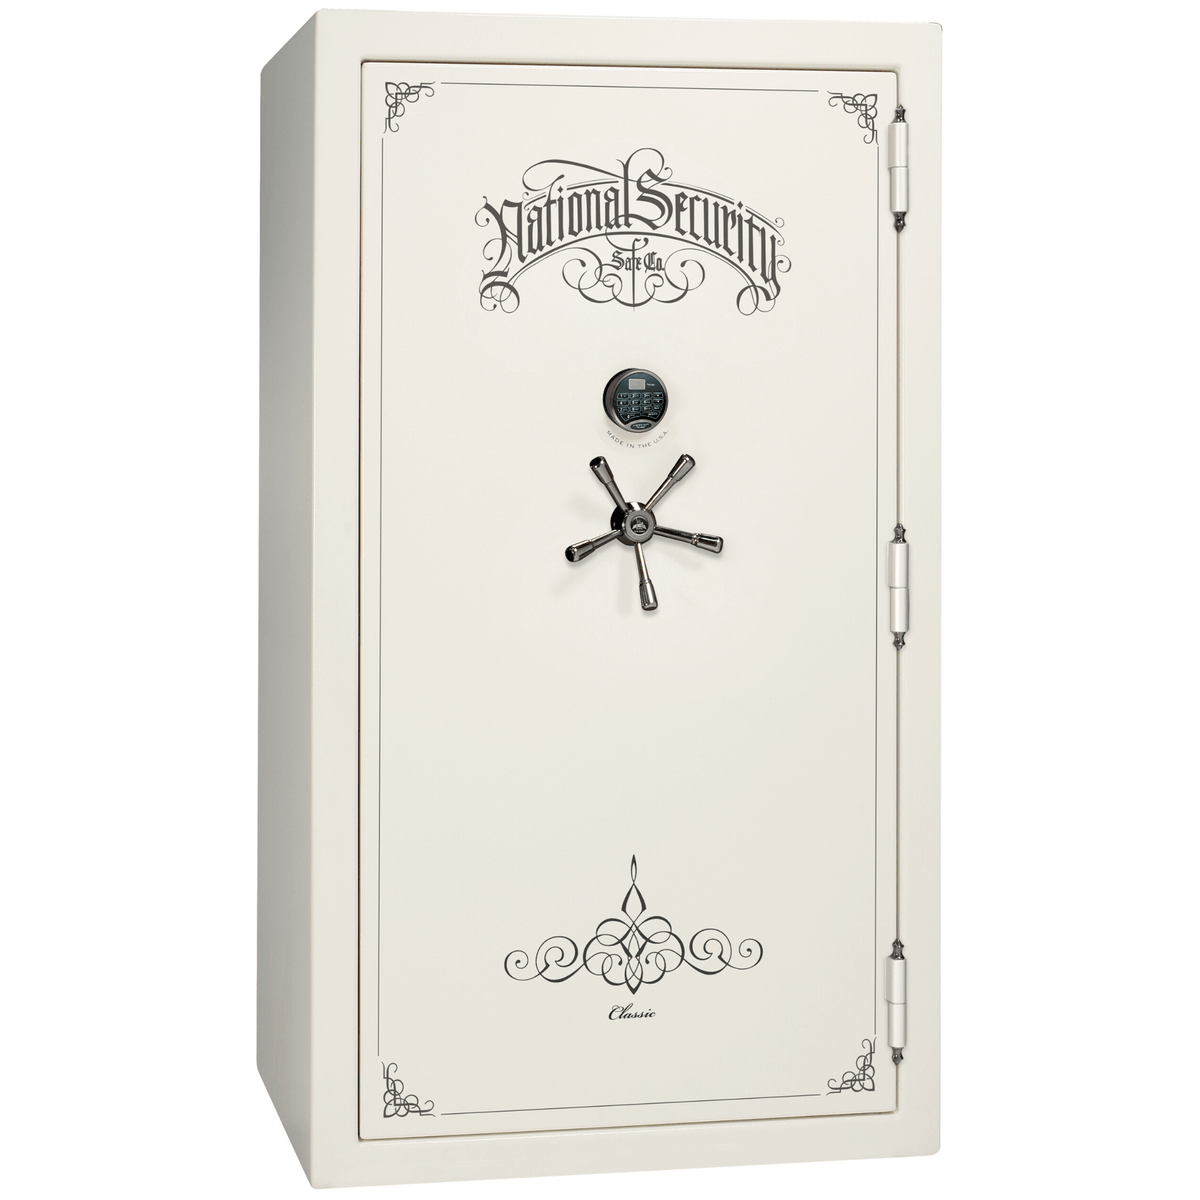 Liberty Safe Classic Plus 50 in White Gloss with Black Chrome Electronic Lock, closed door.